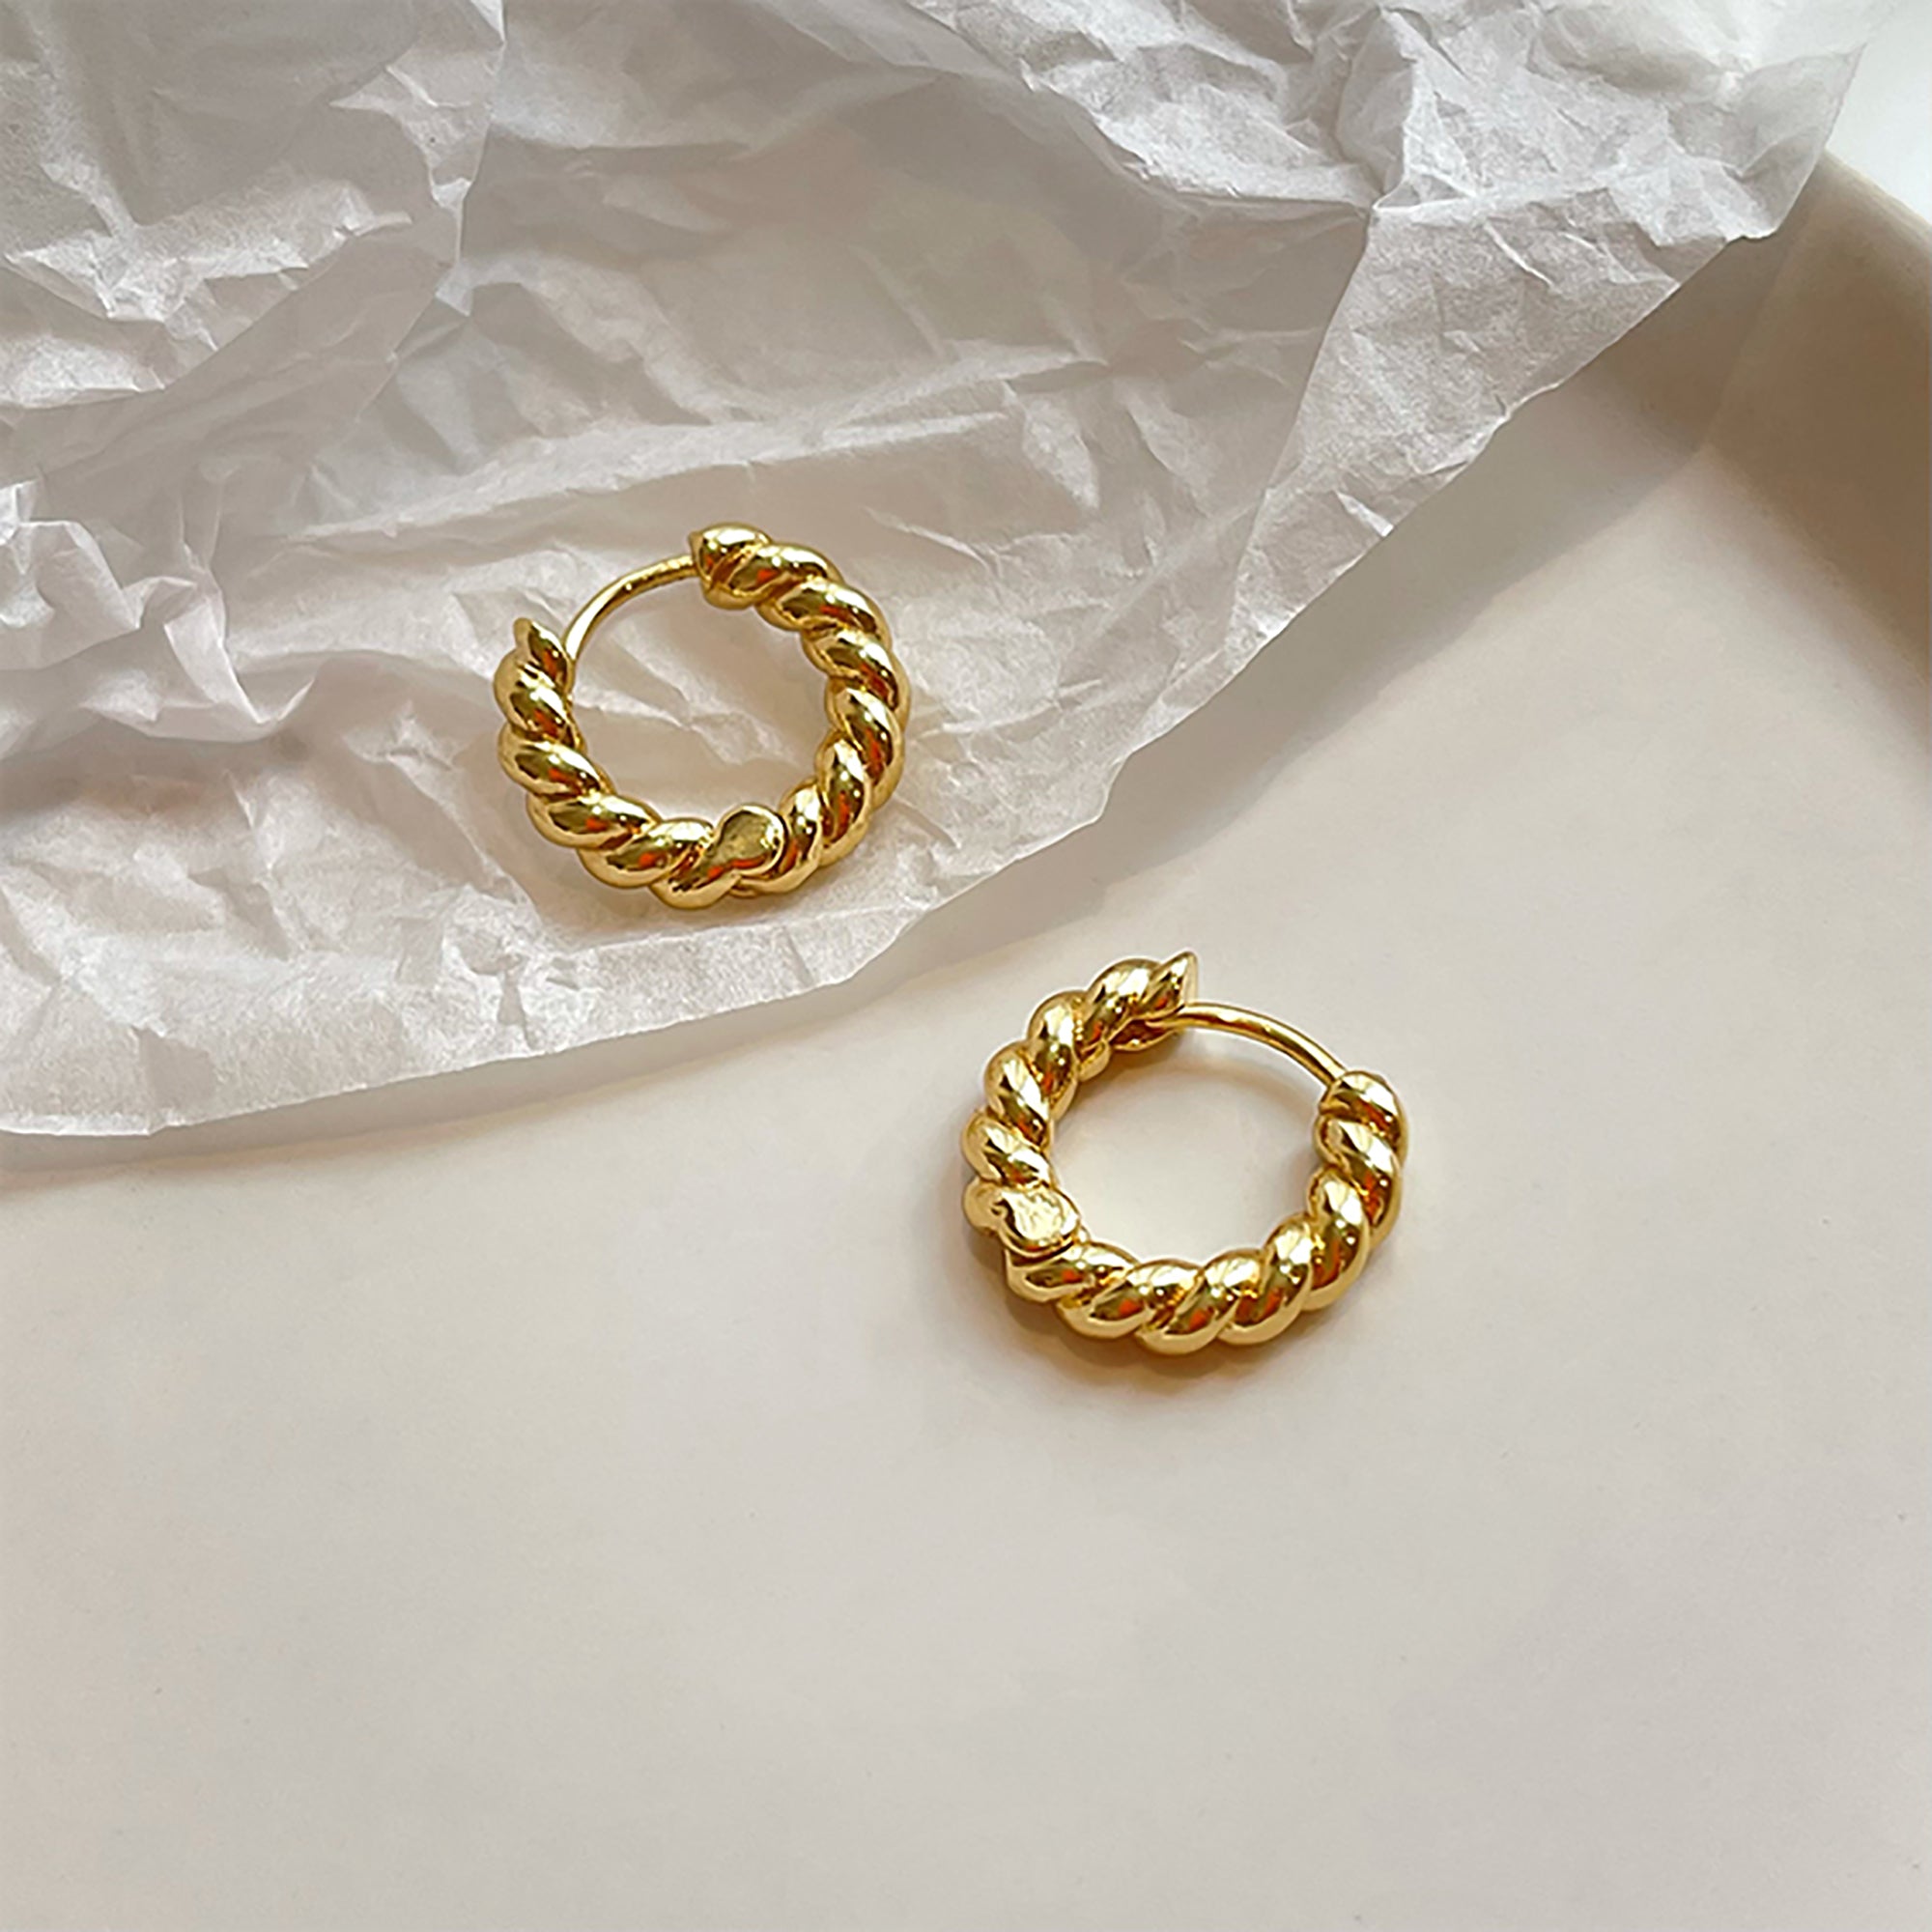 18K Gold Plated Swirl Hoop Earrings Gift wedding influencer styling KOL / Youtuber / Celebrity / Fashion Icon picked